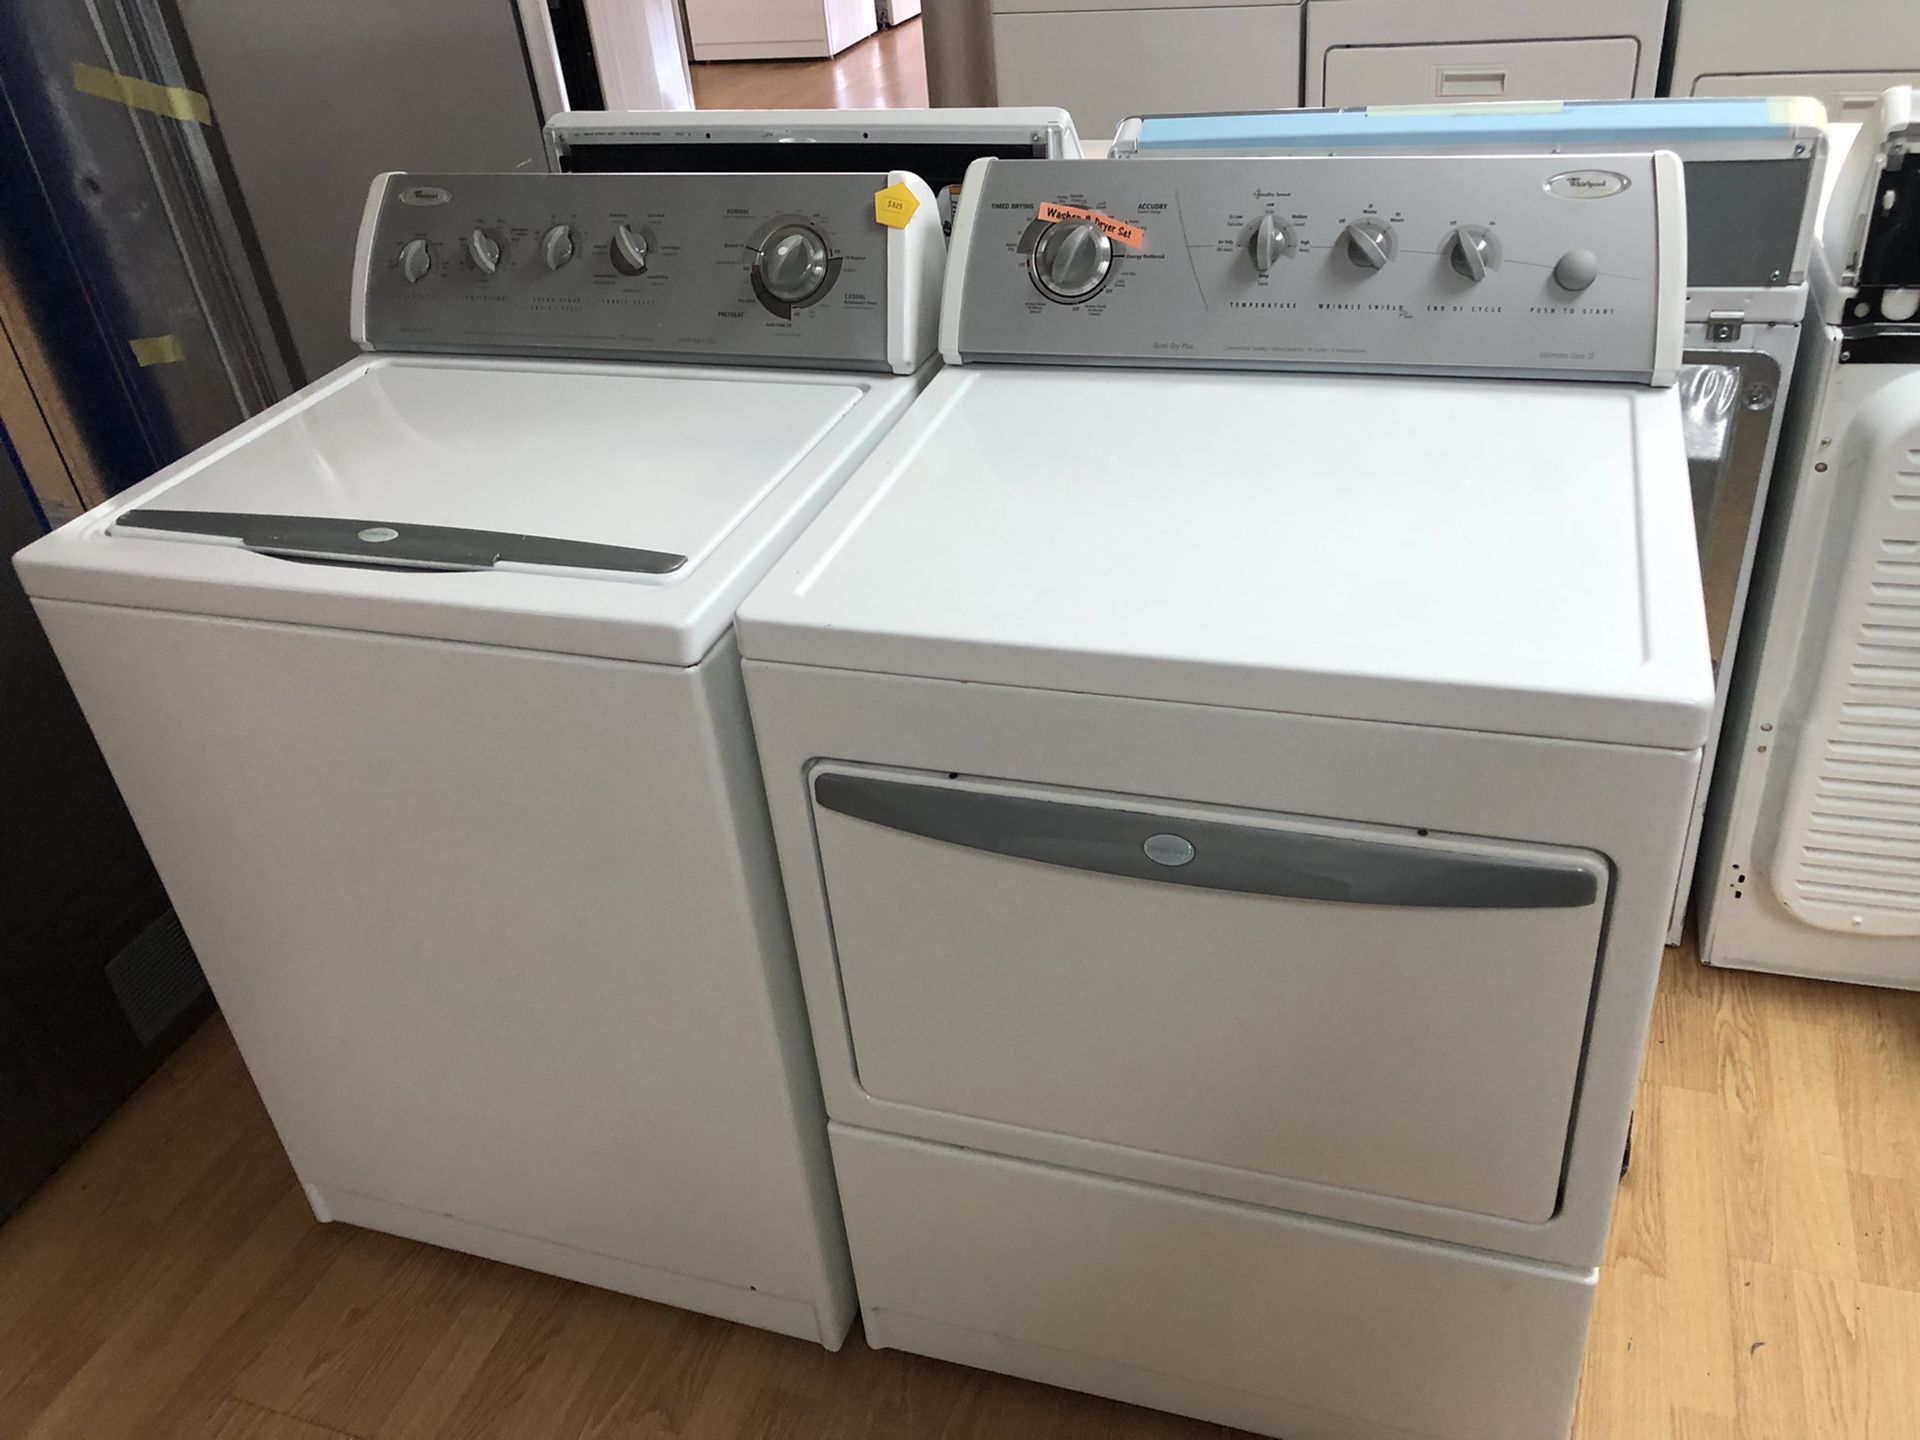 Whirlpool white washer and dryer set